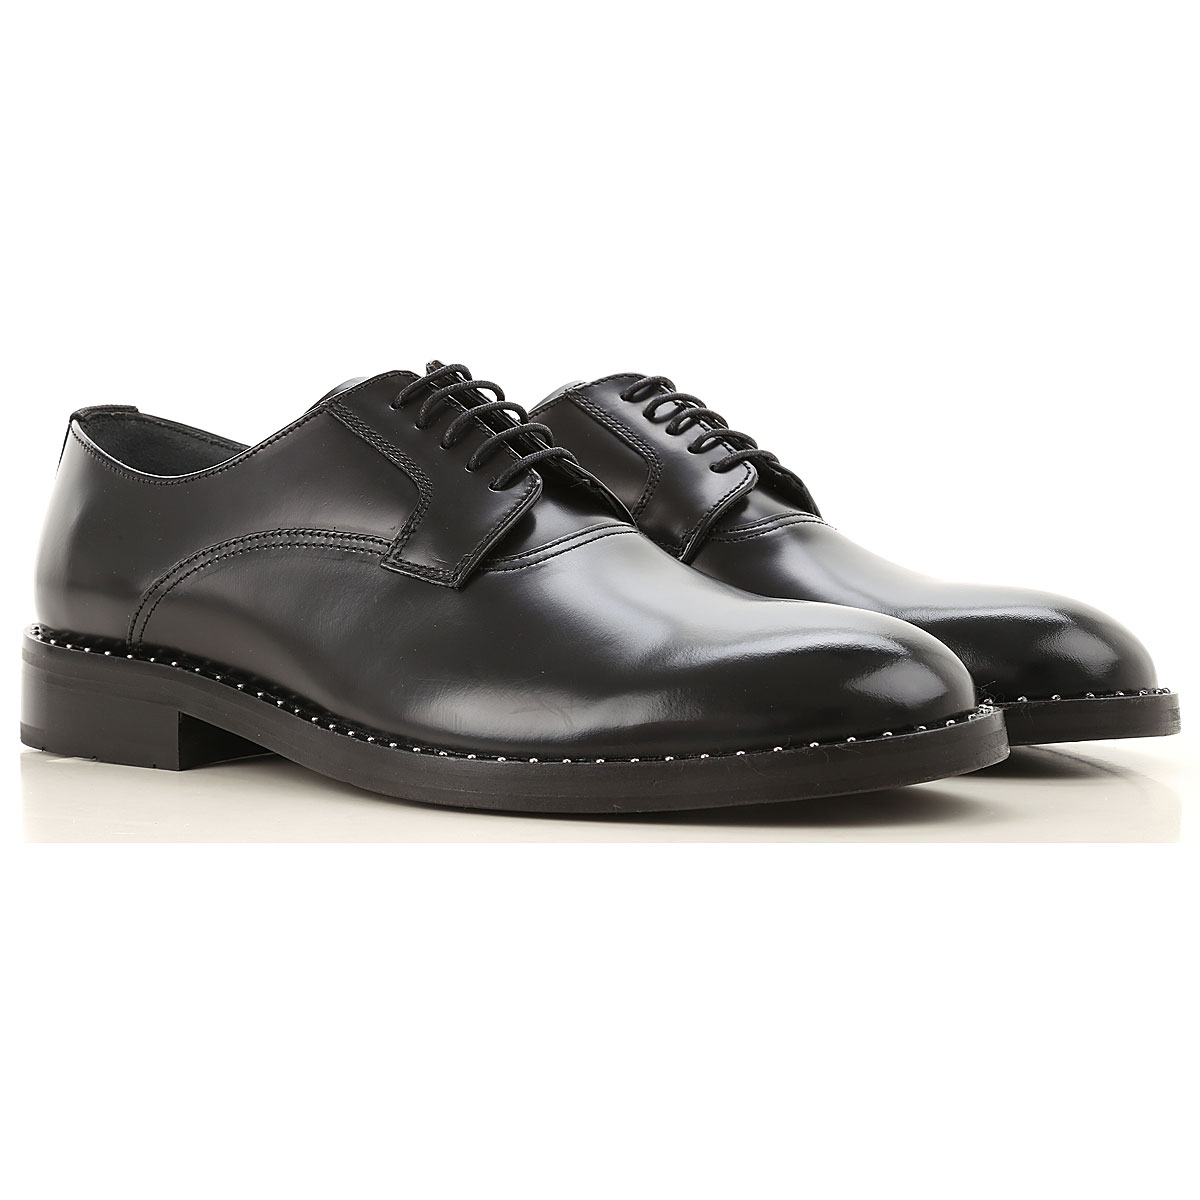 Mens Shoes Karl Lagerfeld, Style code: kl12325-000-giove